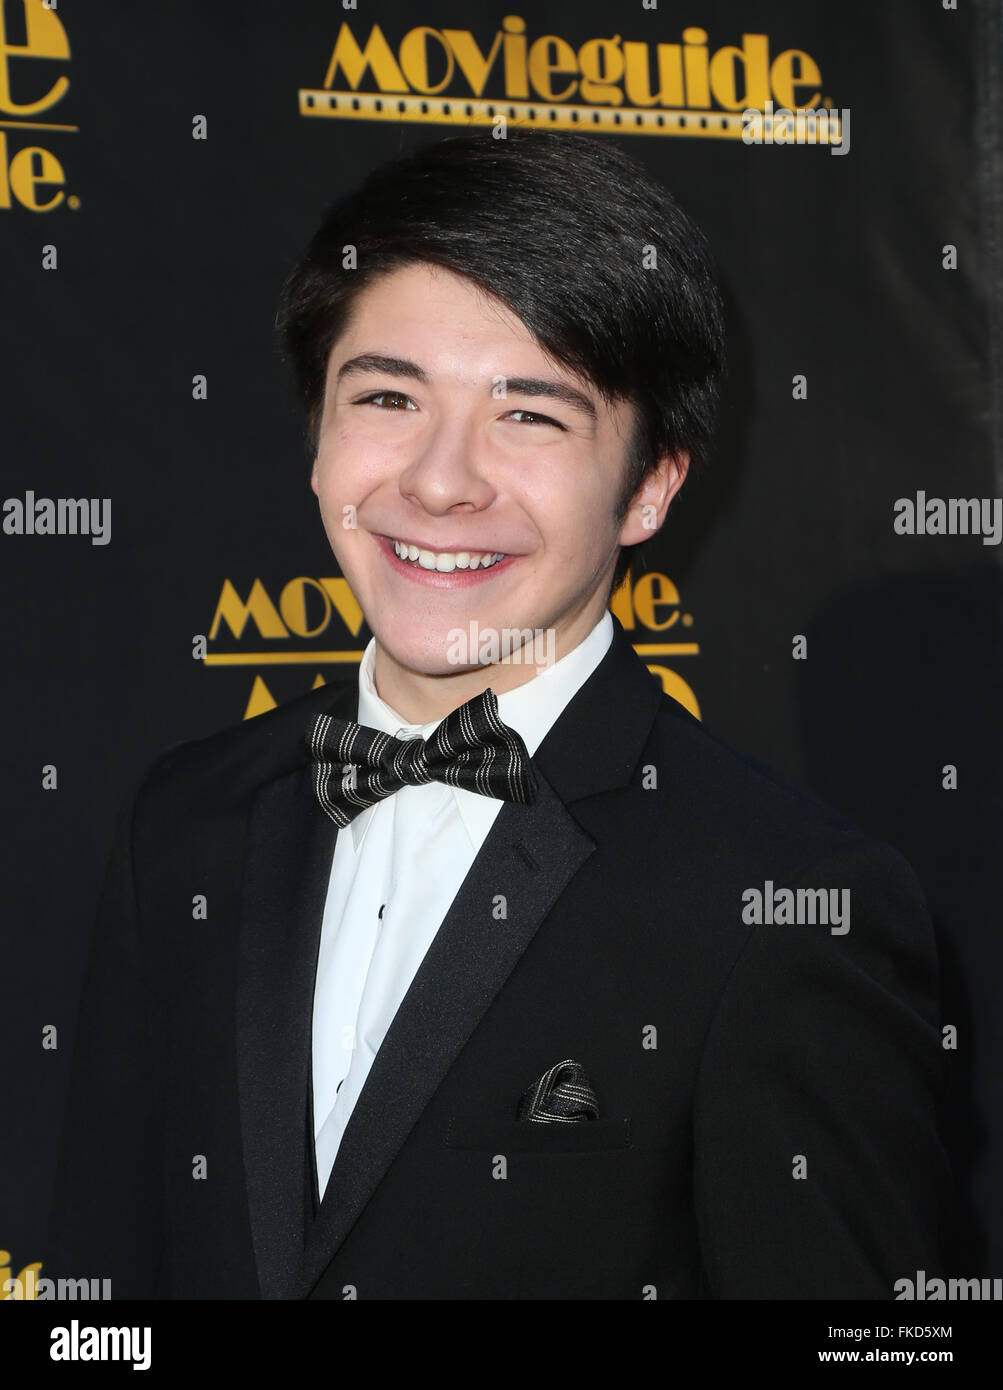 24th Annual Movieguide Awards - Arrivals  Featuring: Sloane Morgan Siegel Where: Universal City, California, United States When: 06 Feb 2016 Stock Photo